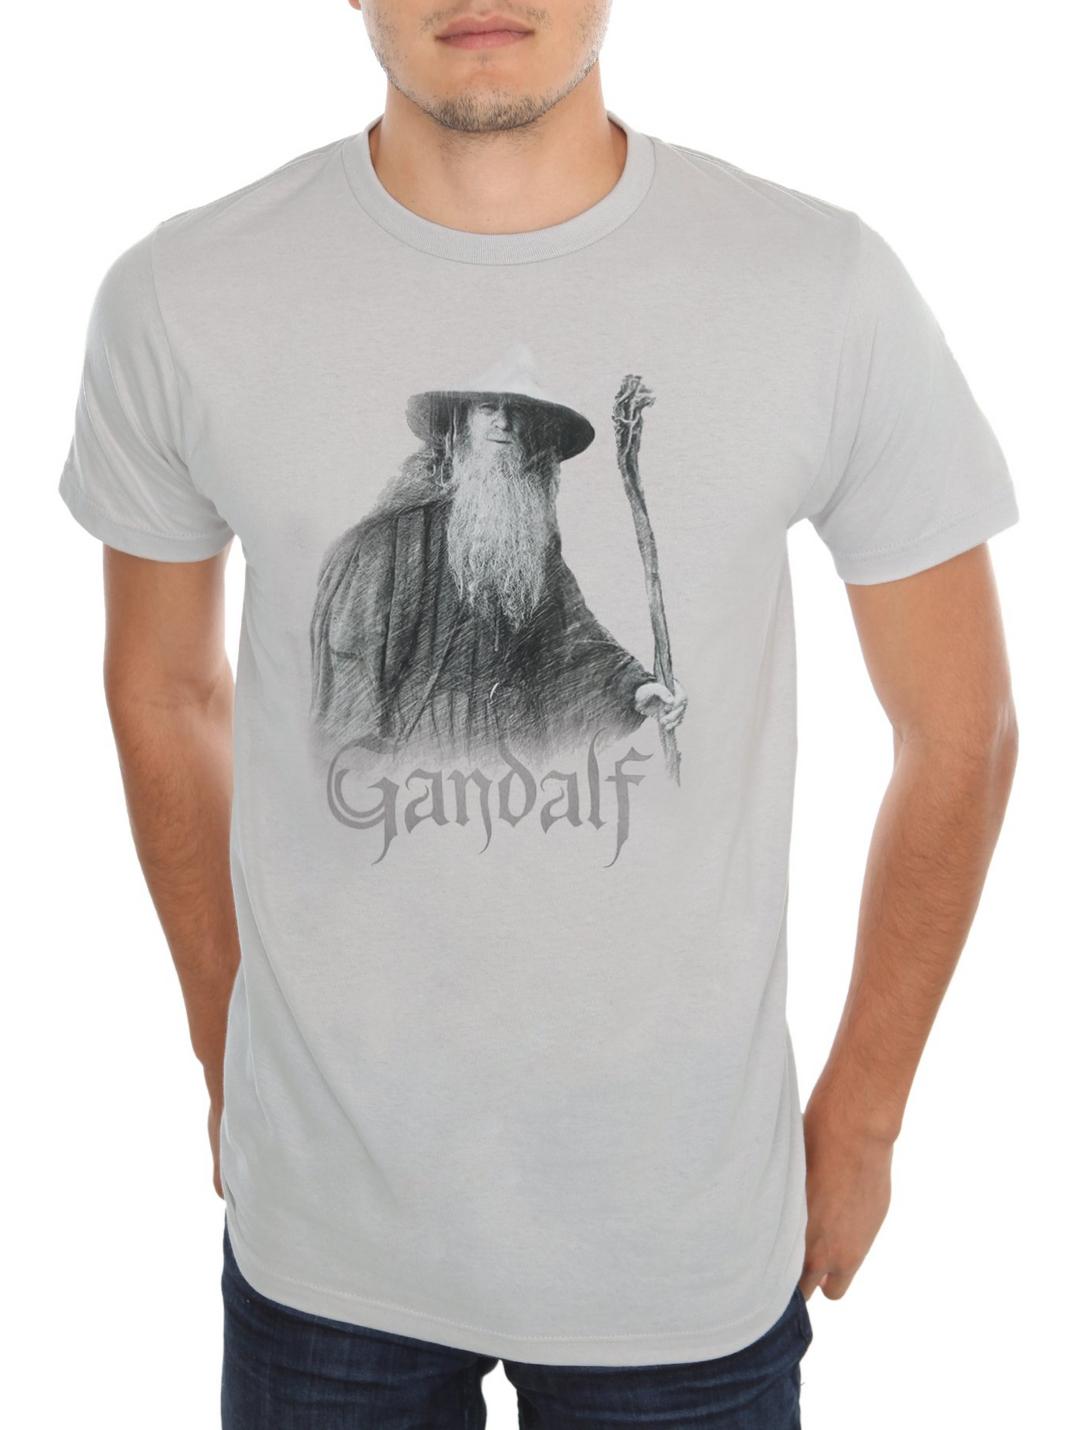 The Lord Of The Rings Gandalf The Grey T-Shirt, BLACK, hi-res